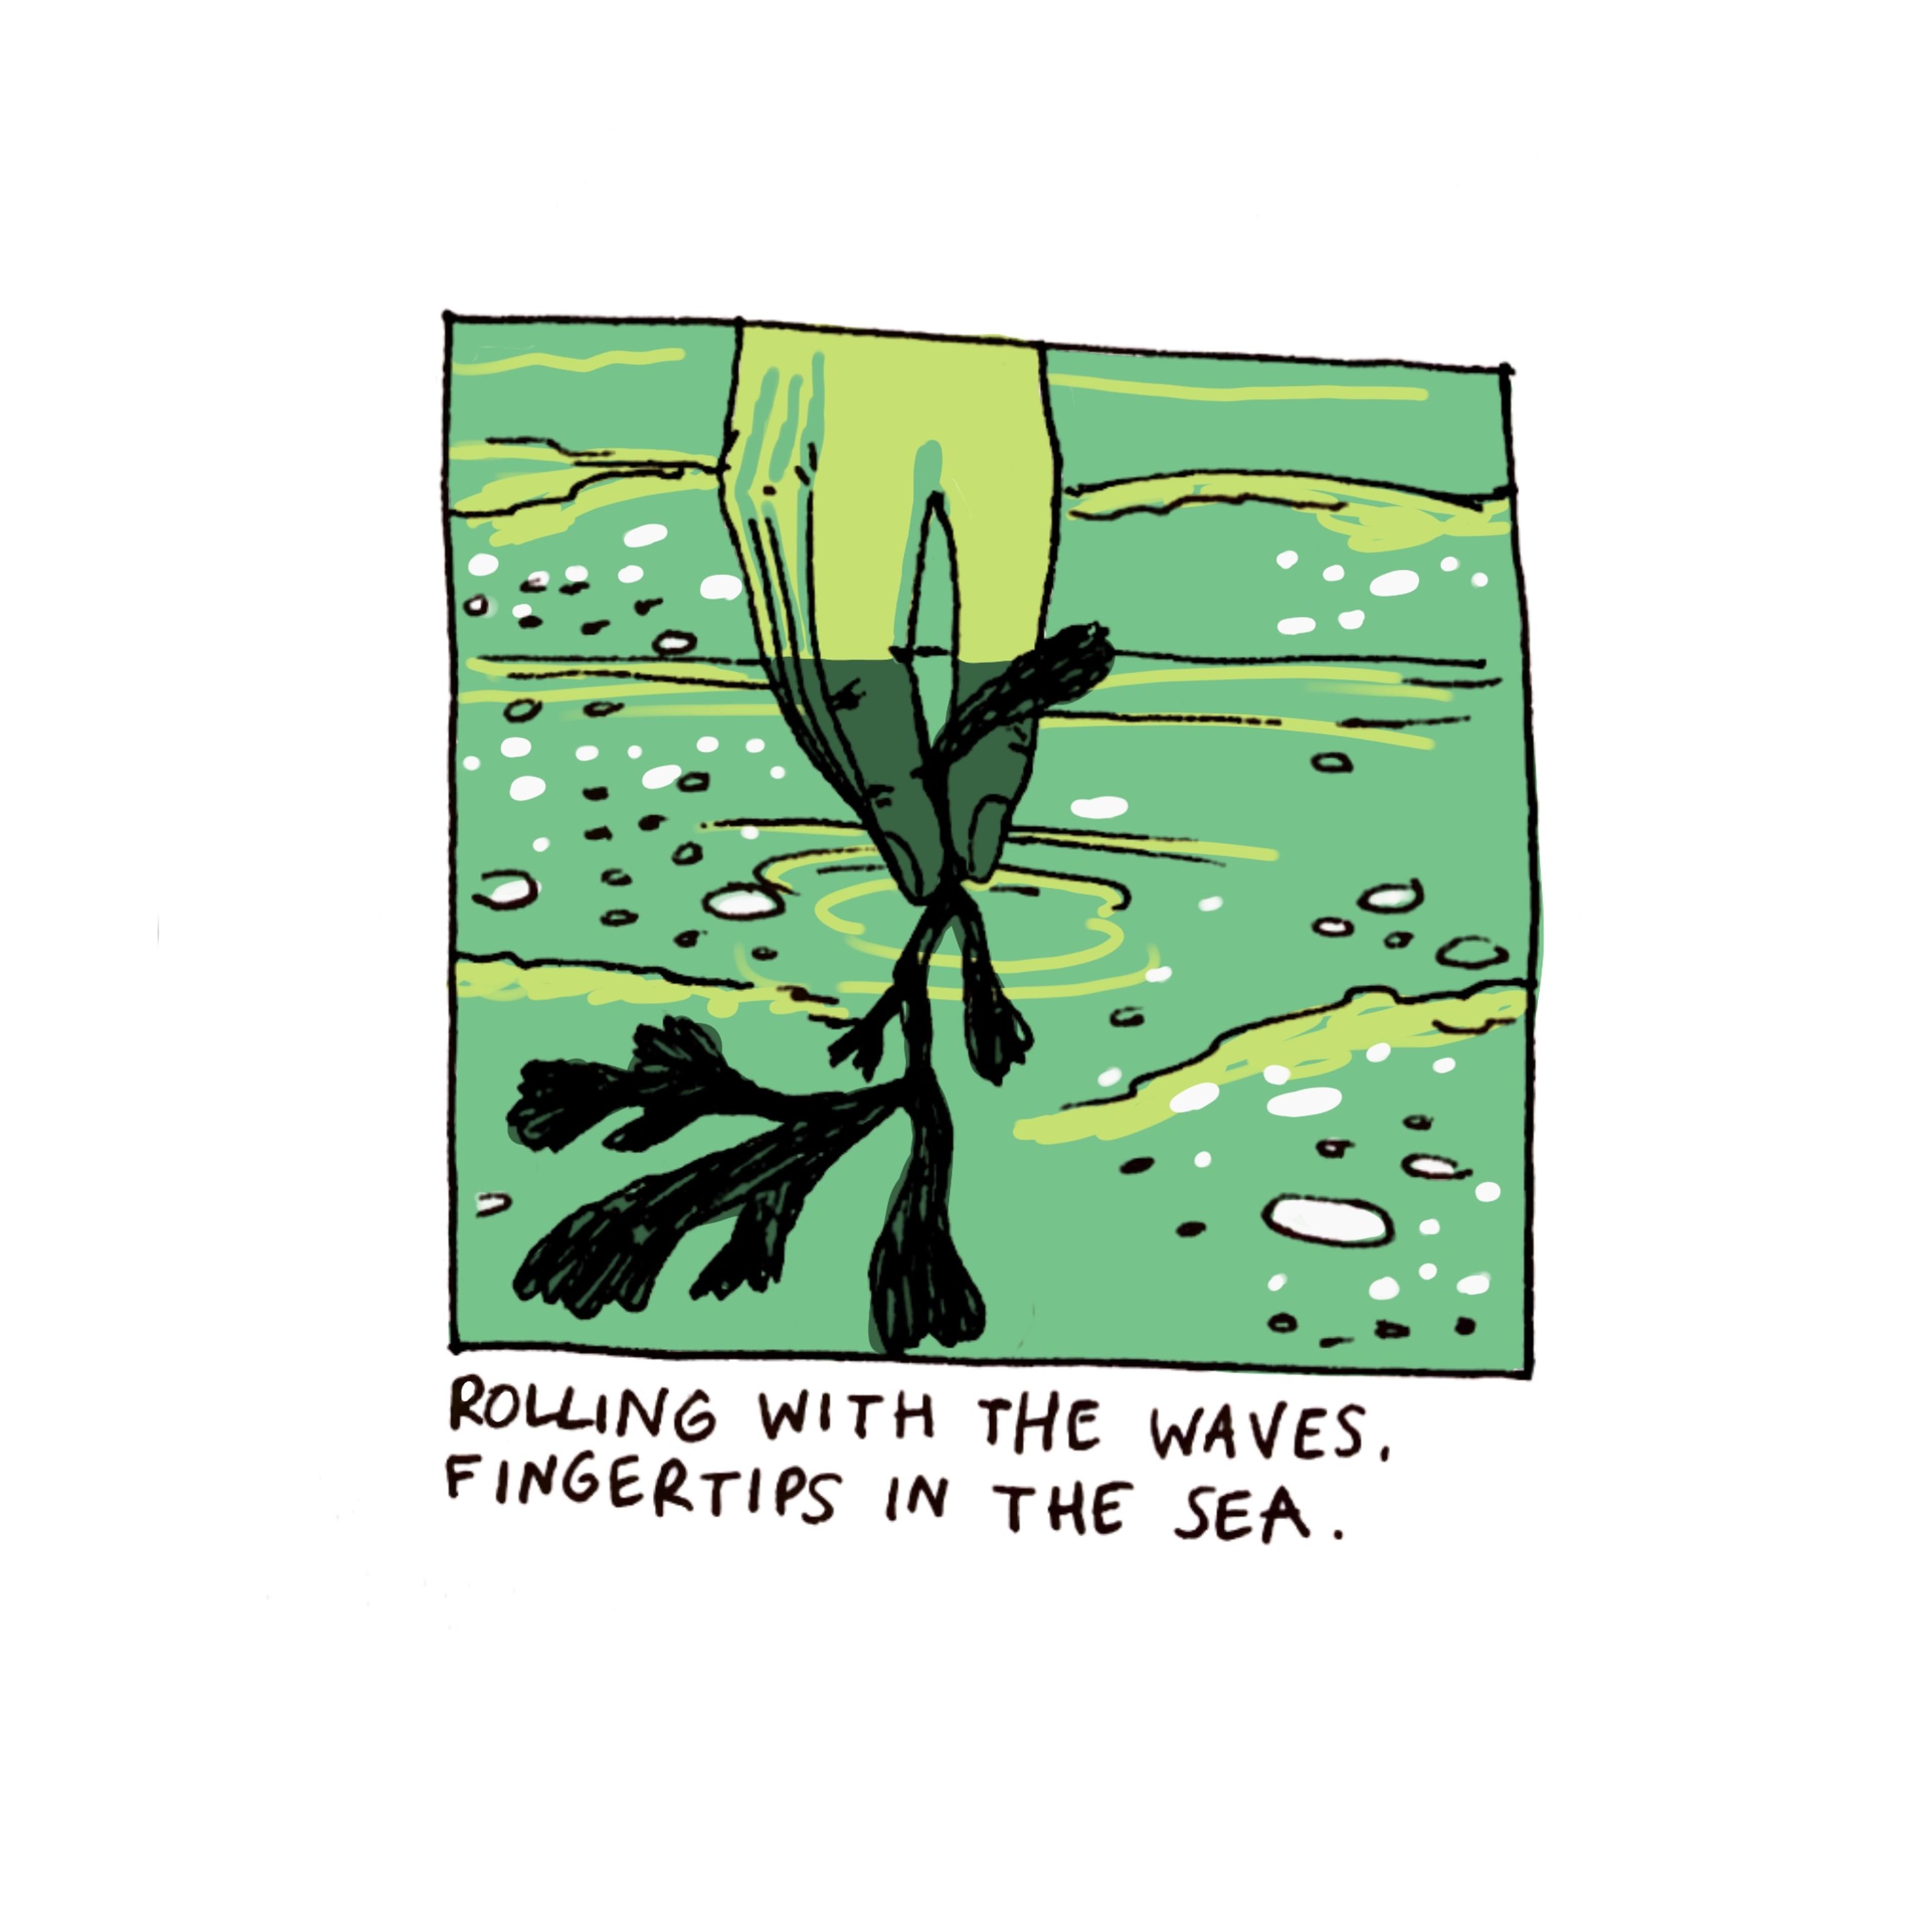 Drawing of a hand holding foliage underwater. The panel reads: "Rolling with the waves. Fingertips in the sea."